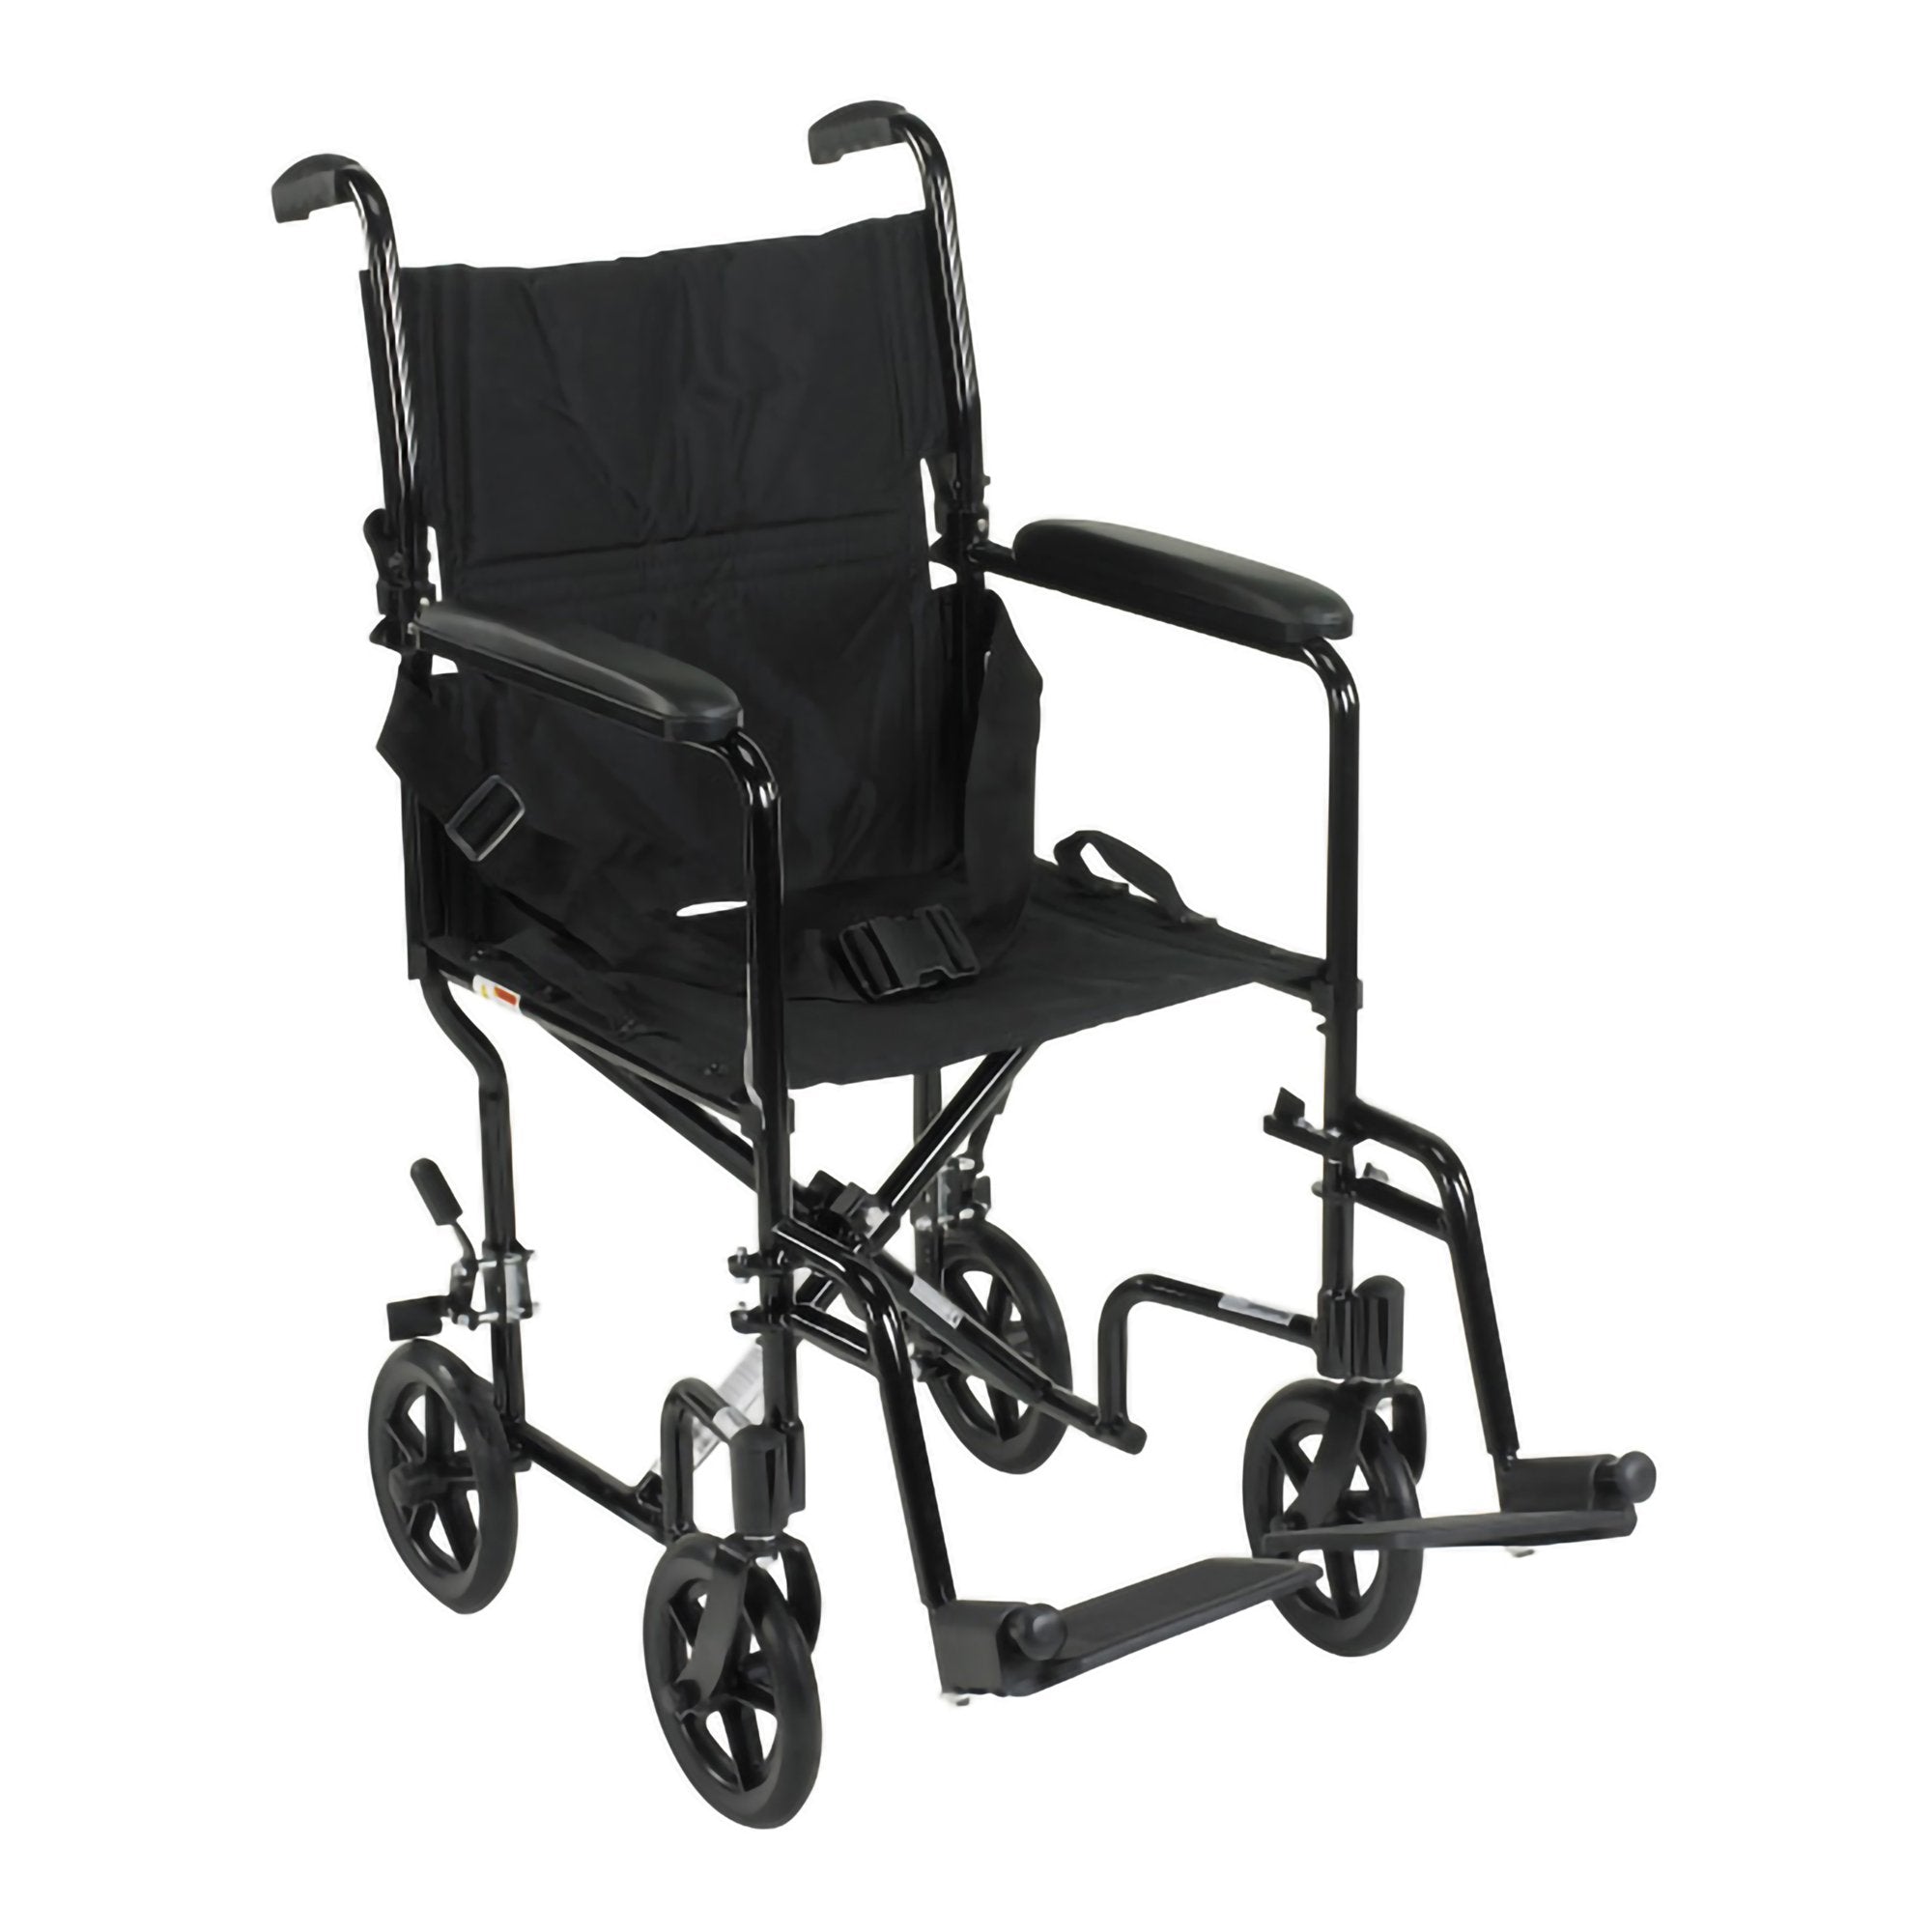 Lightweight Transport Chair McKesson Aluminum Frame with Black Finish 300 lbs. Weight Capacity Fixed Height / Padded Arm Black Upholstery